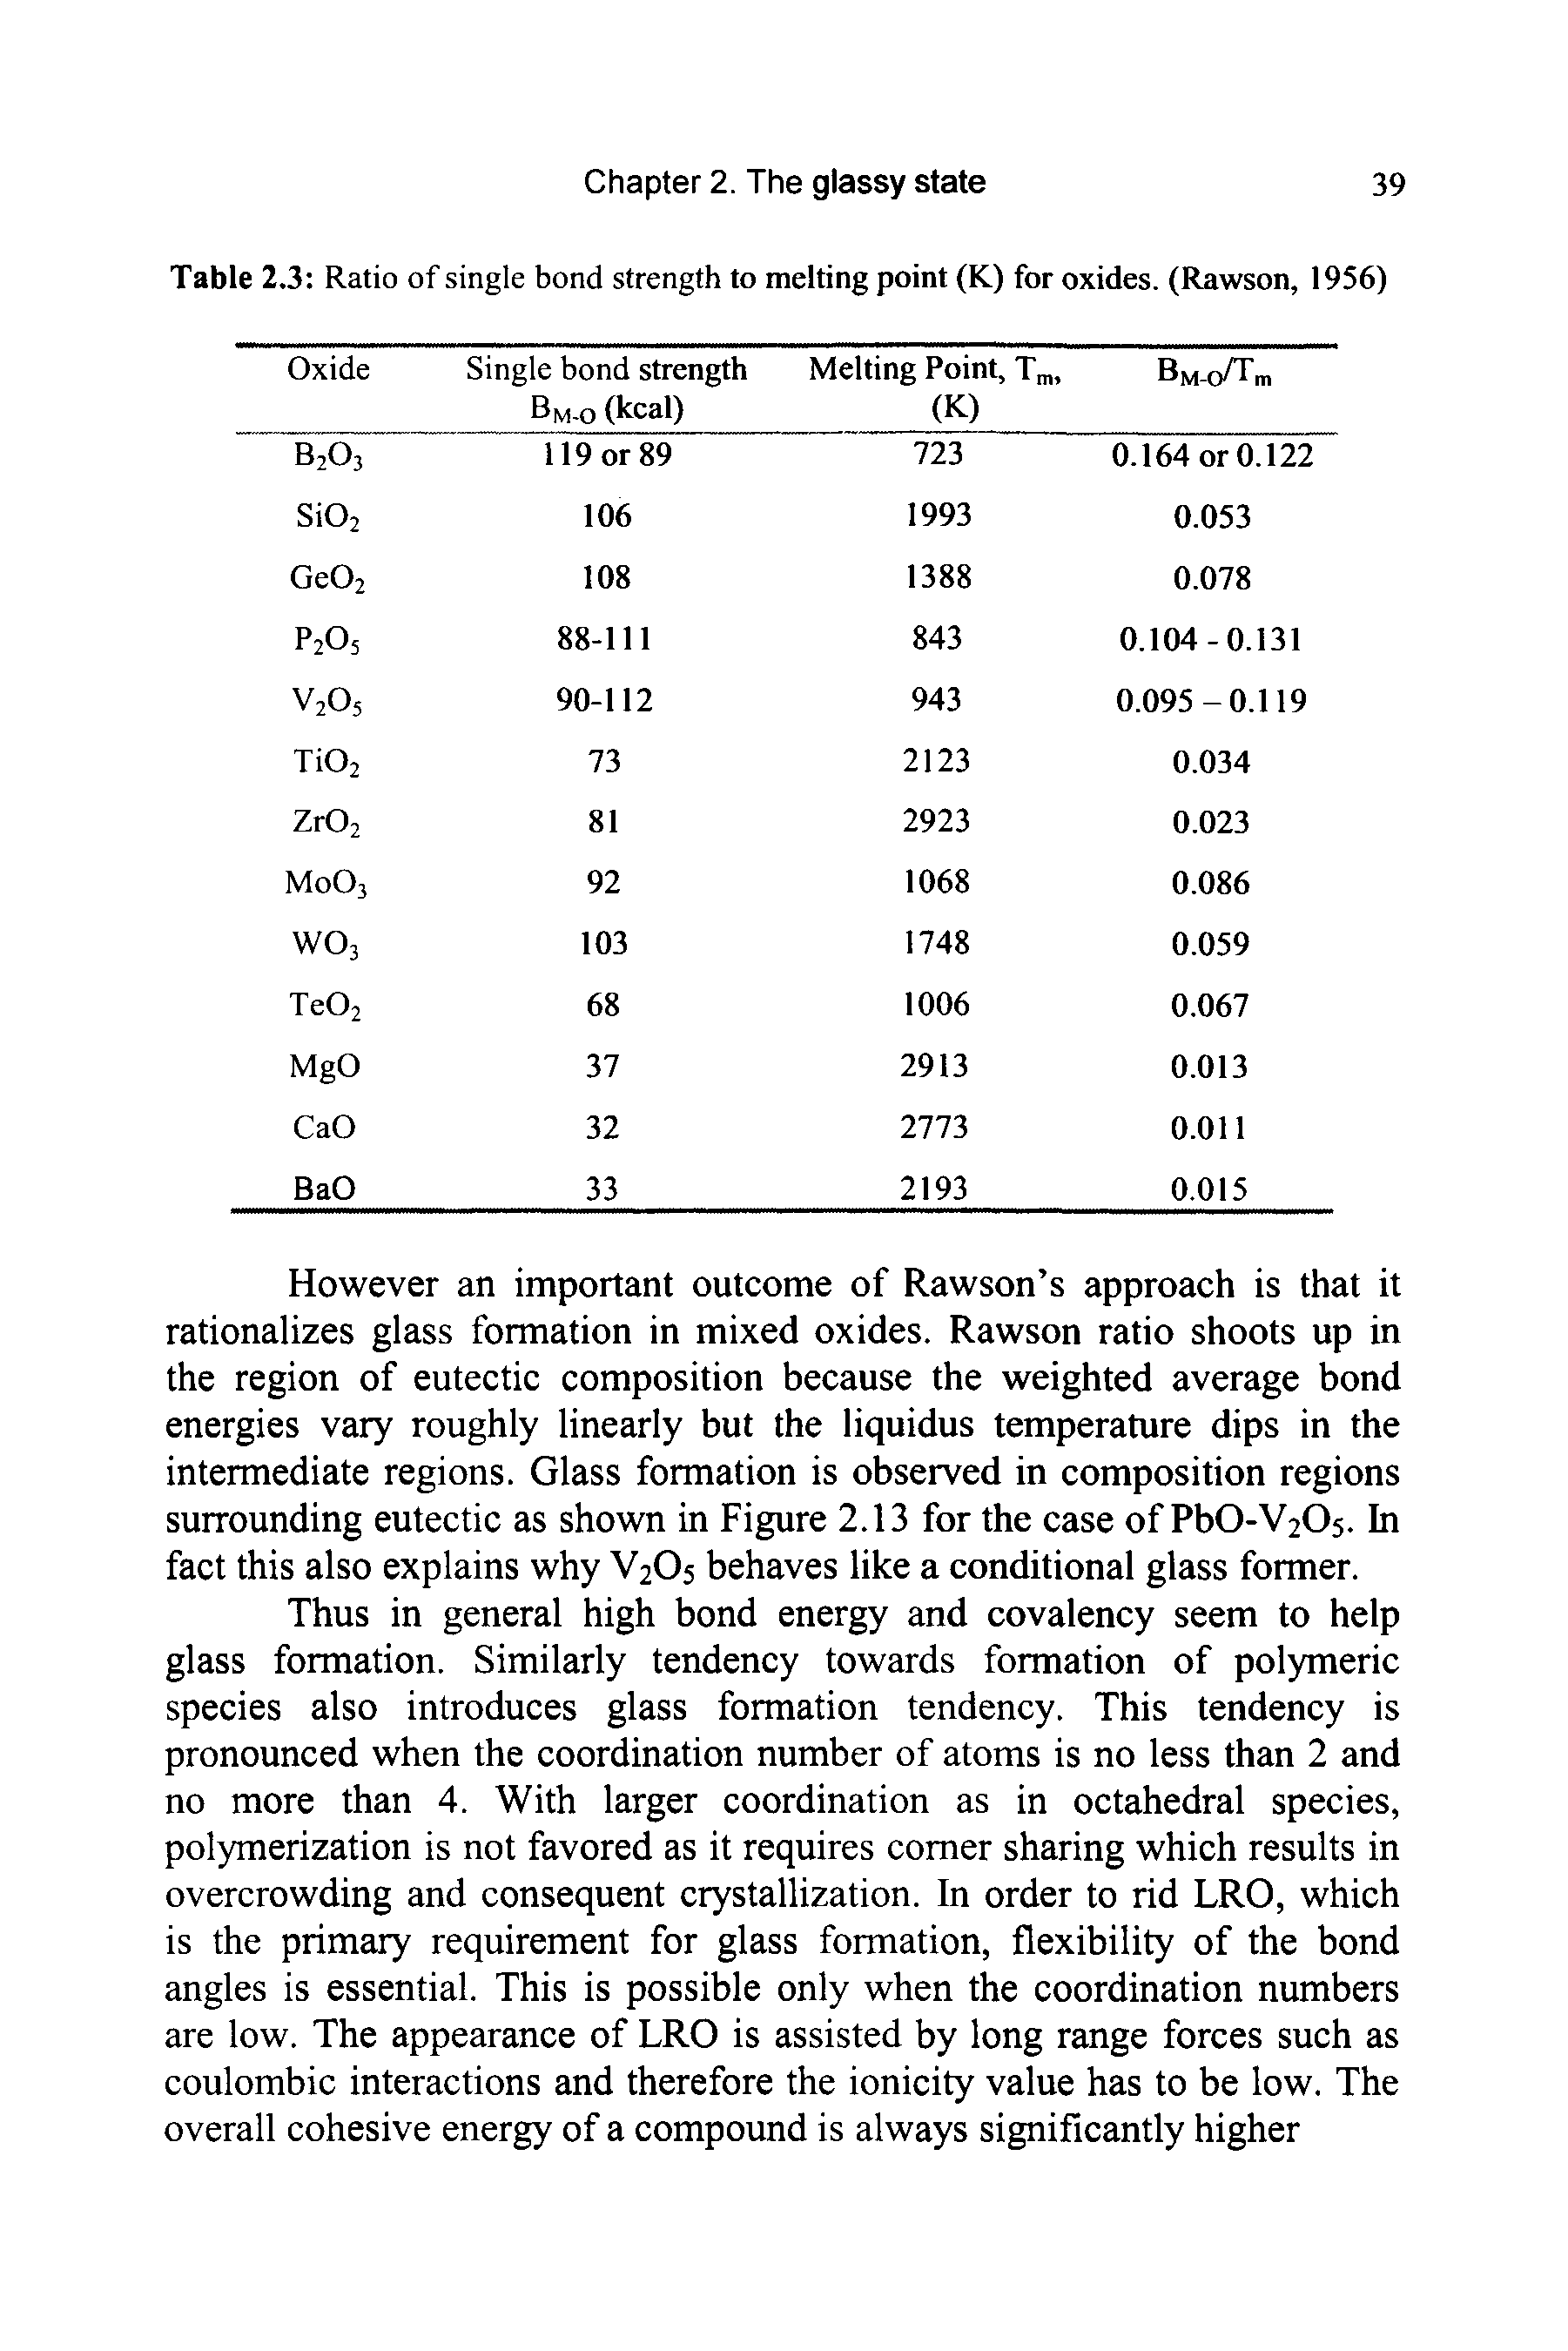 Table 2.3 Ratio of single bond strength to melting point (K) for oxides. (Rawson, 1956)...